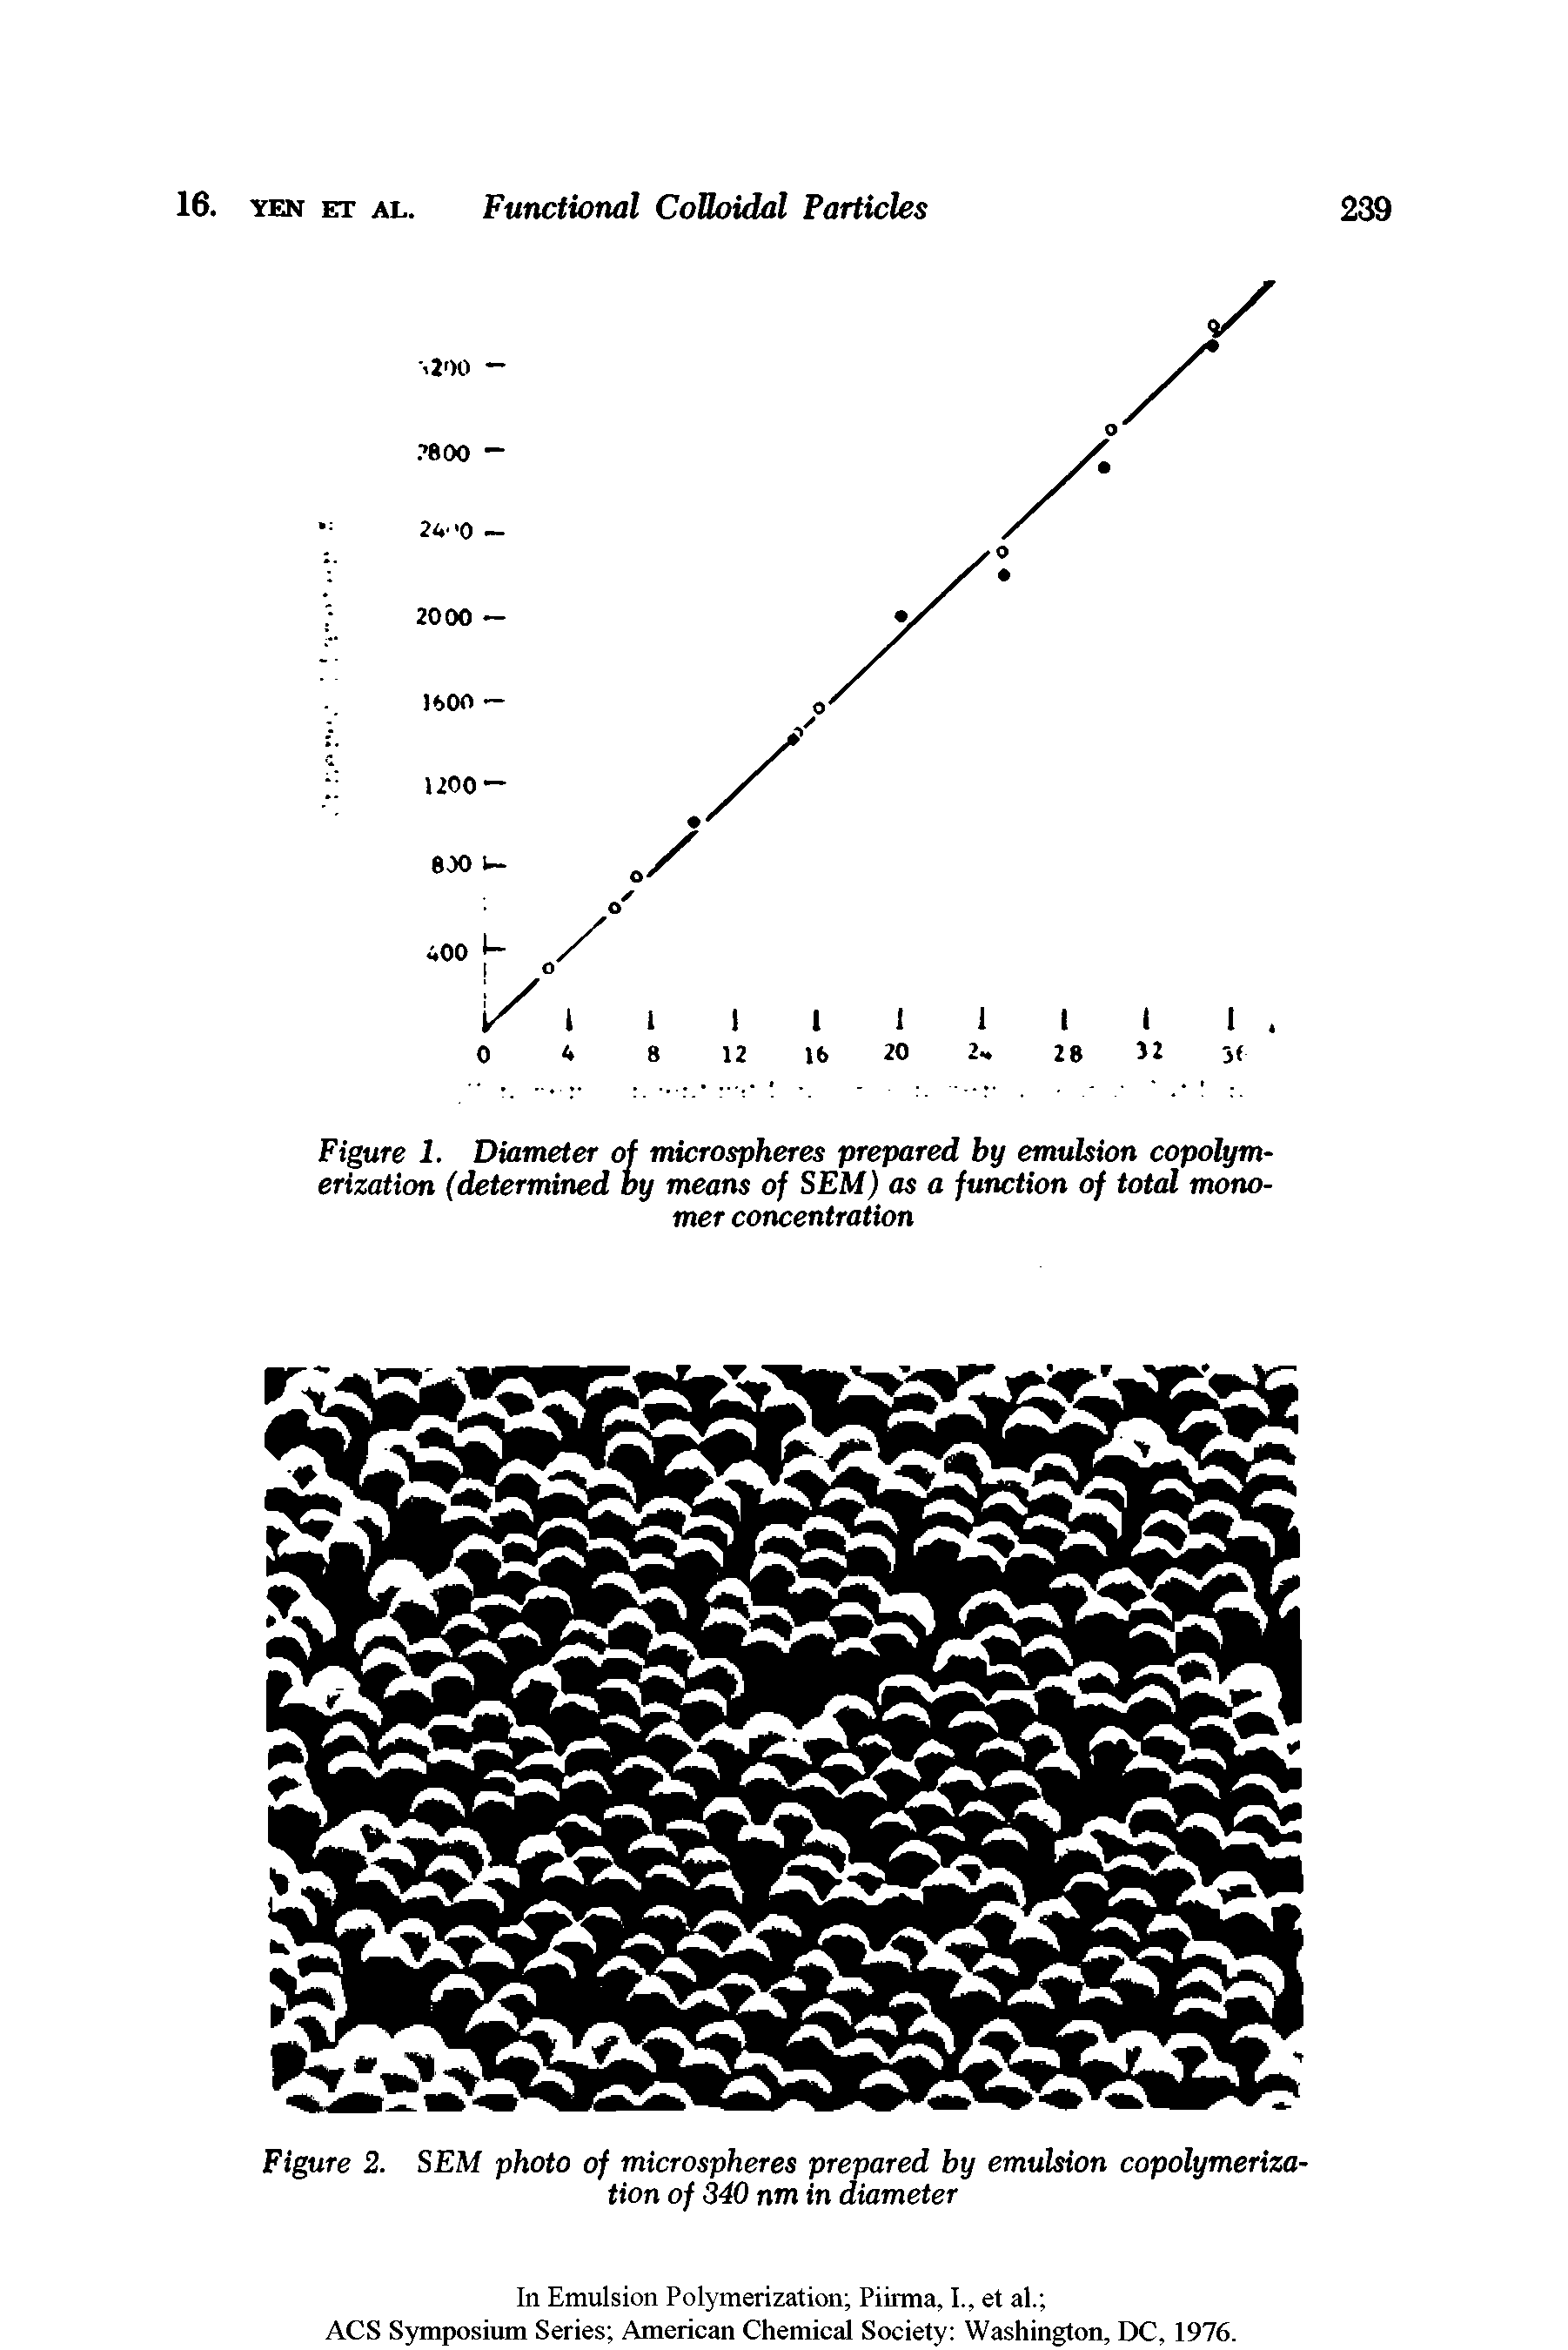 Figure 1. Diameter of microspheres prepared by emulsion copolymerization (determined oy means of SEM) as a function of total monomer concentration...